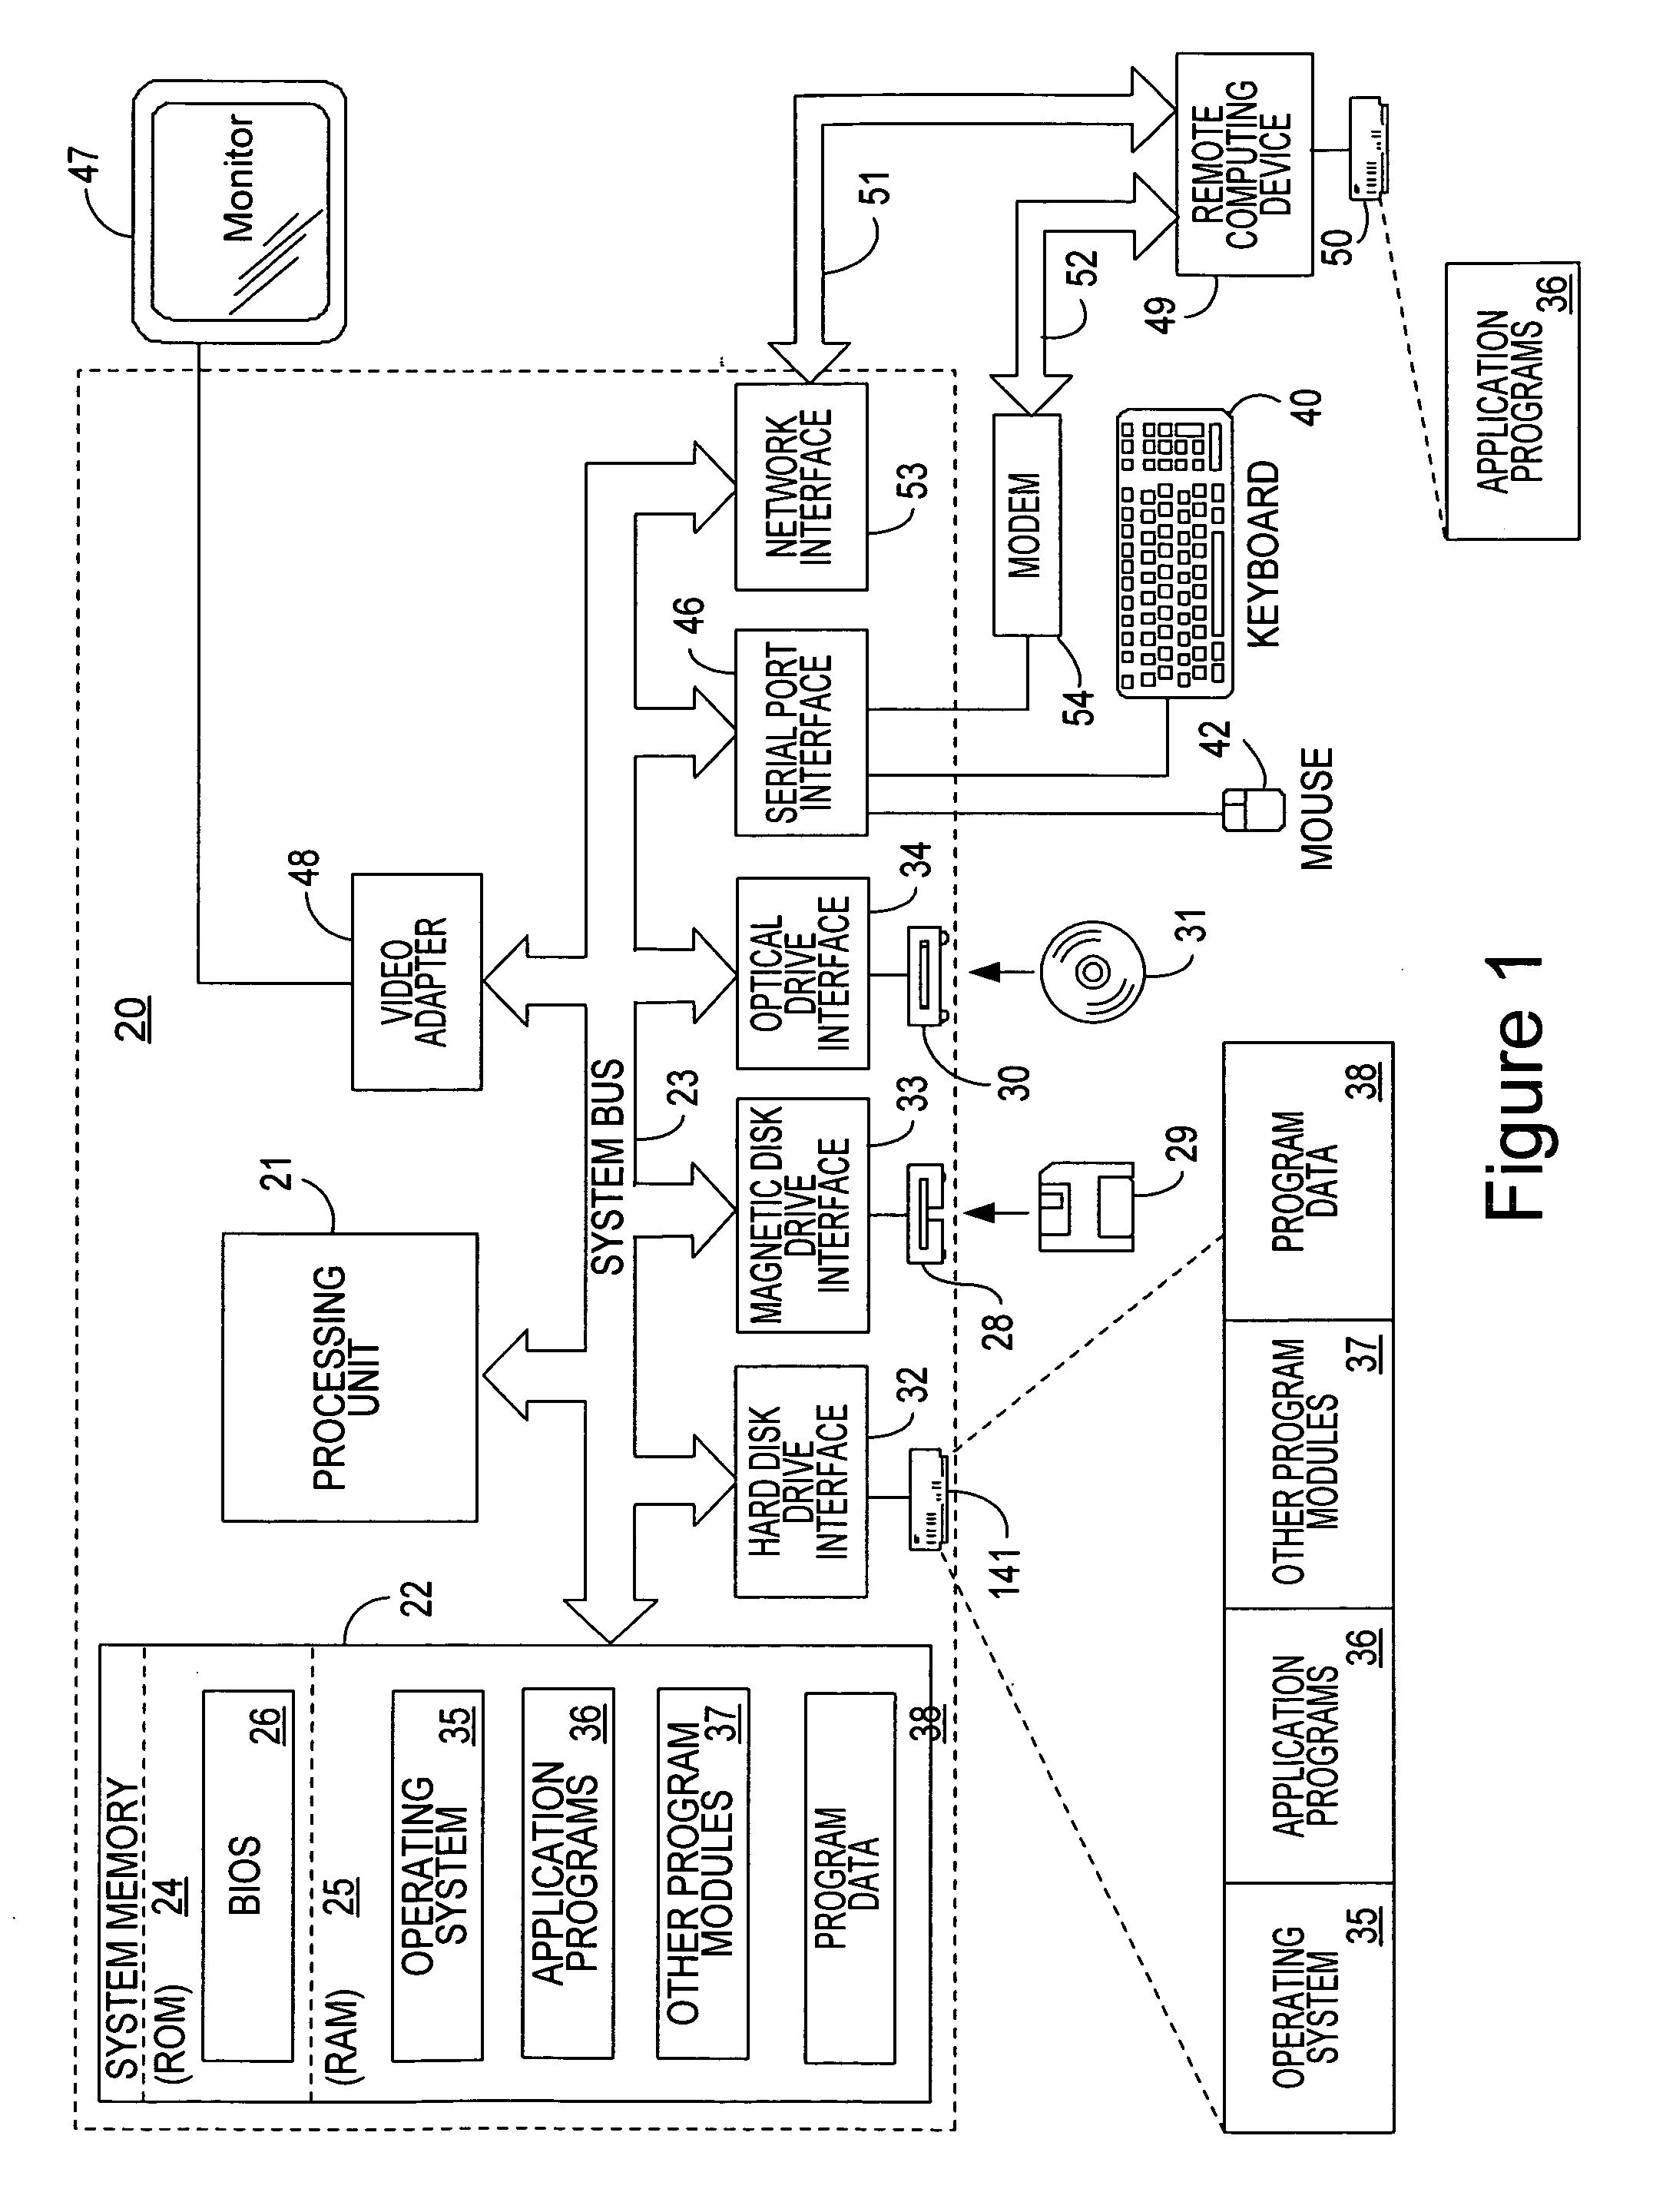 Method and system of a traffic control application programming interface for abstracting the use of kernel-level traffic control components